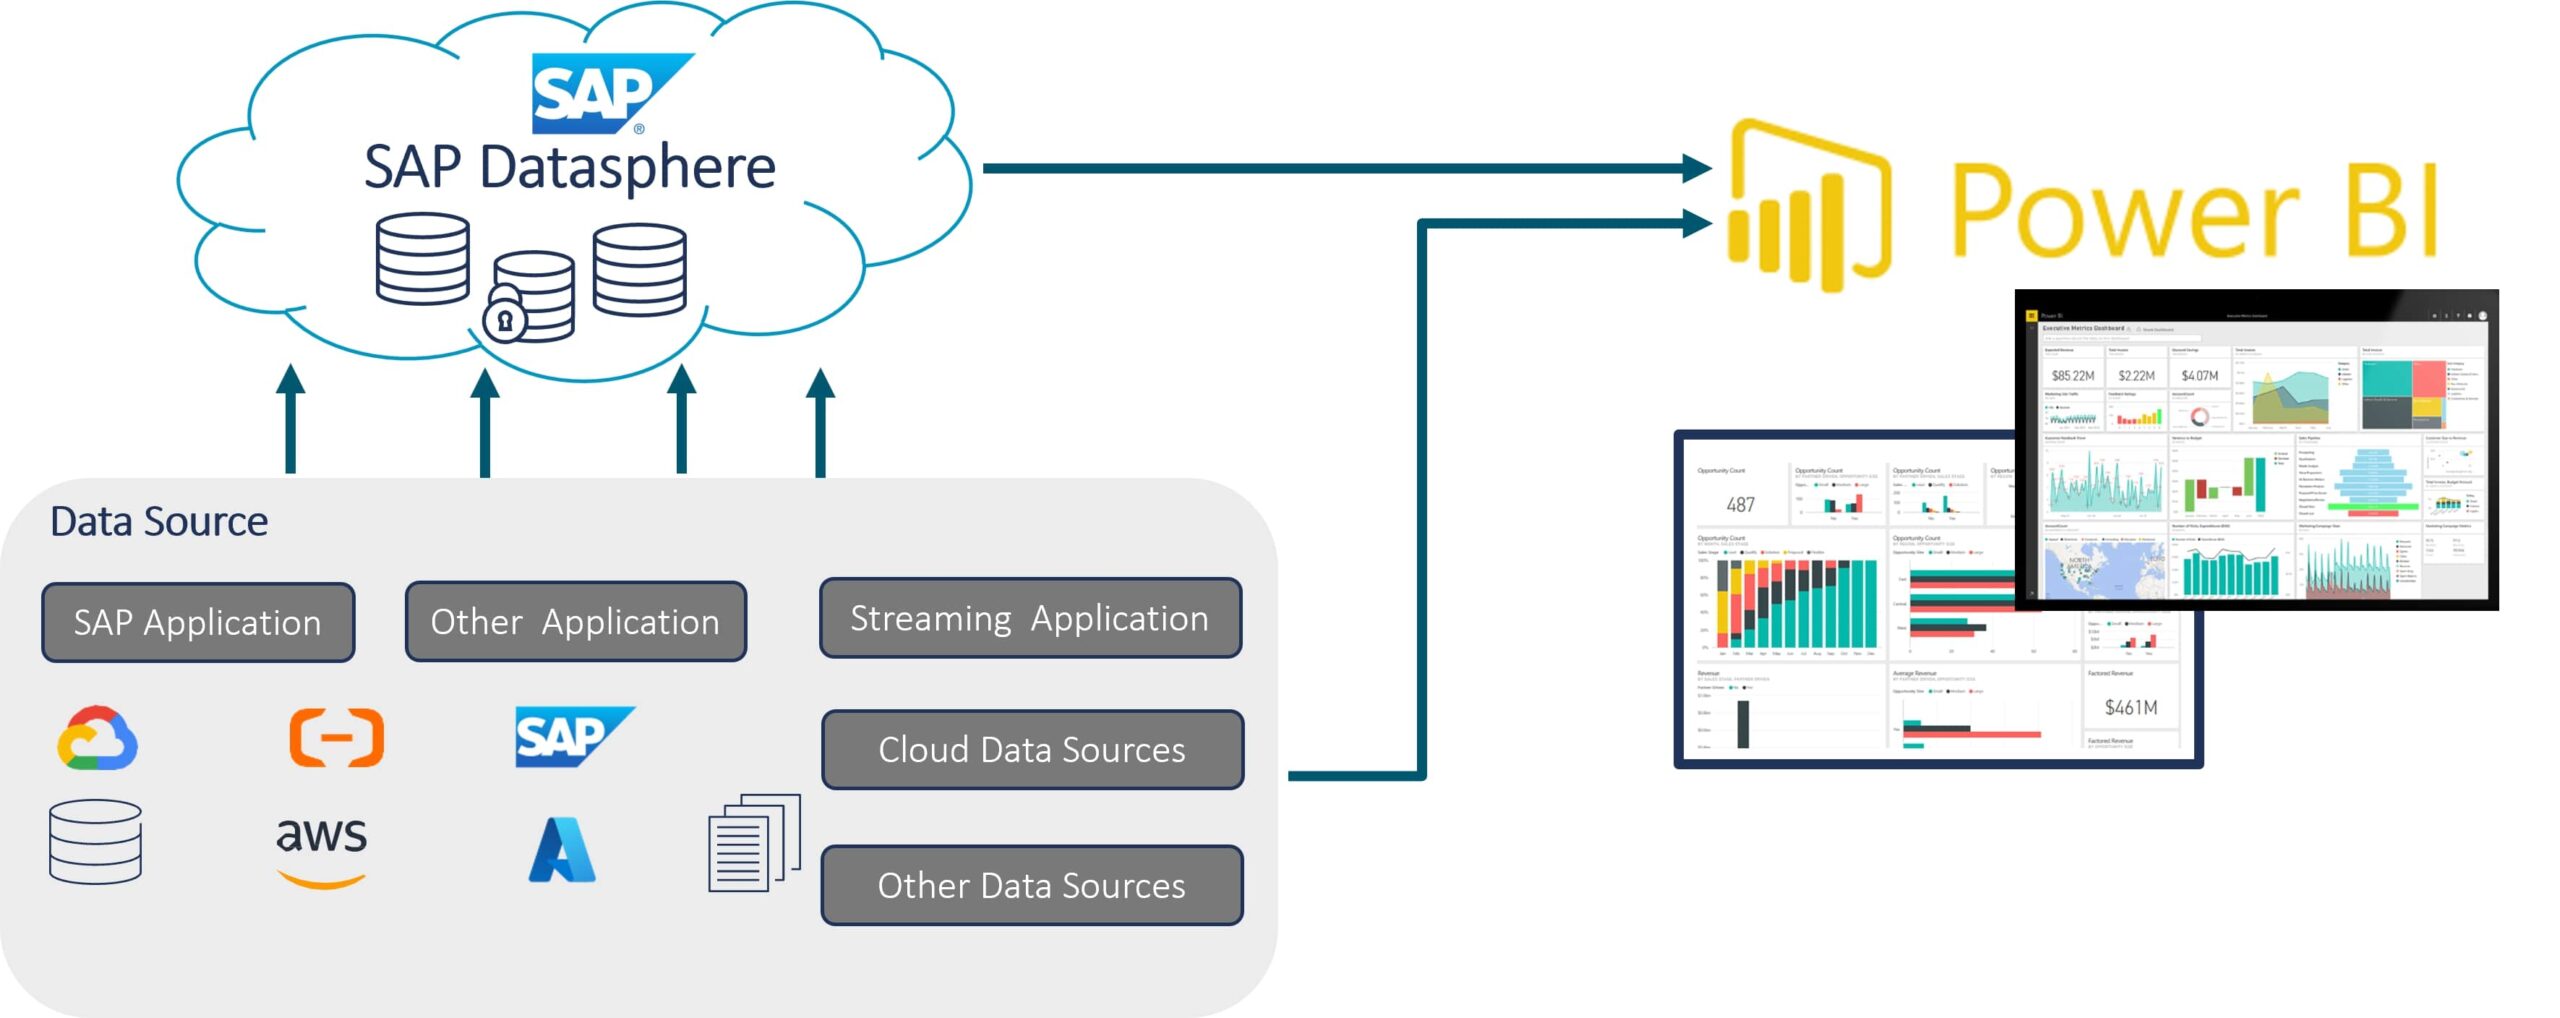 Fig. 1: Consumption of data from SAP Datasphere in Power BI - architectural overview